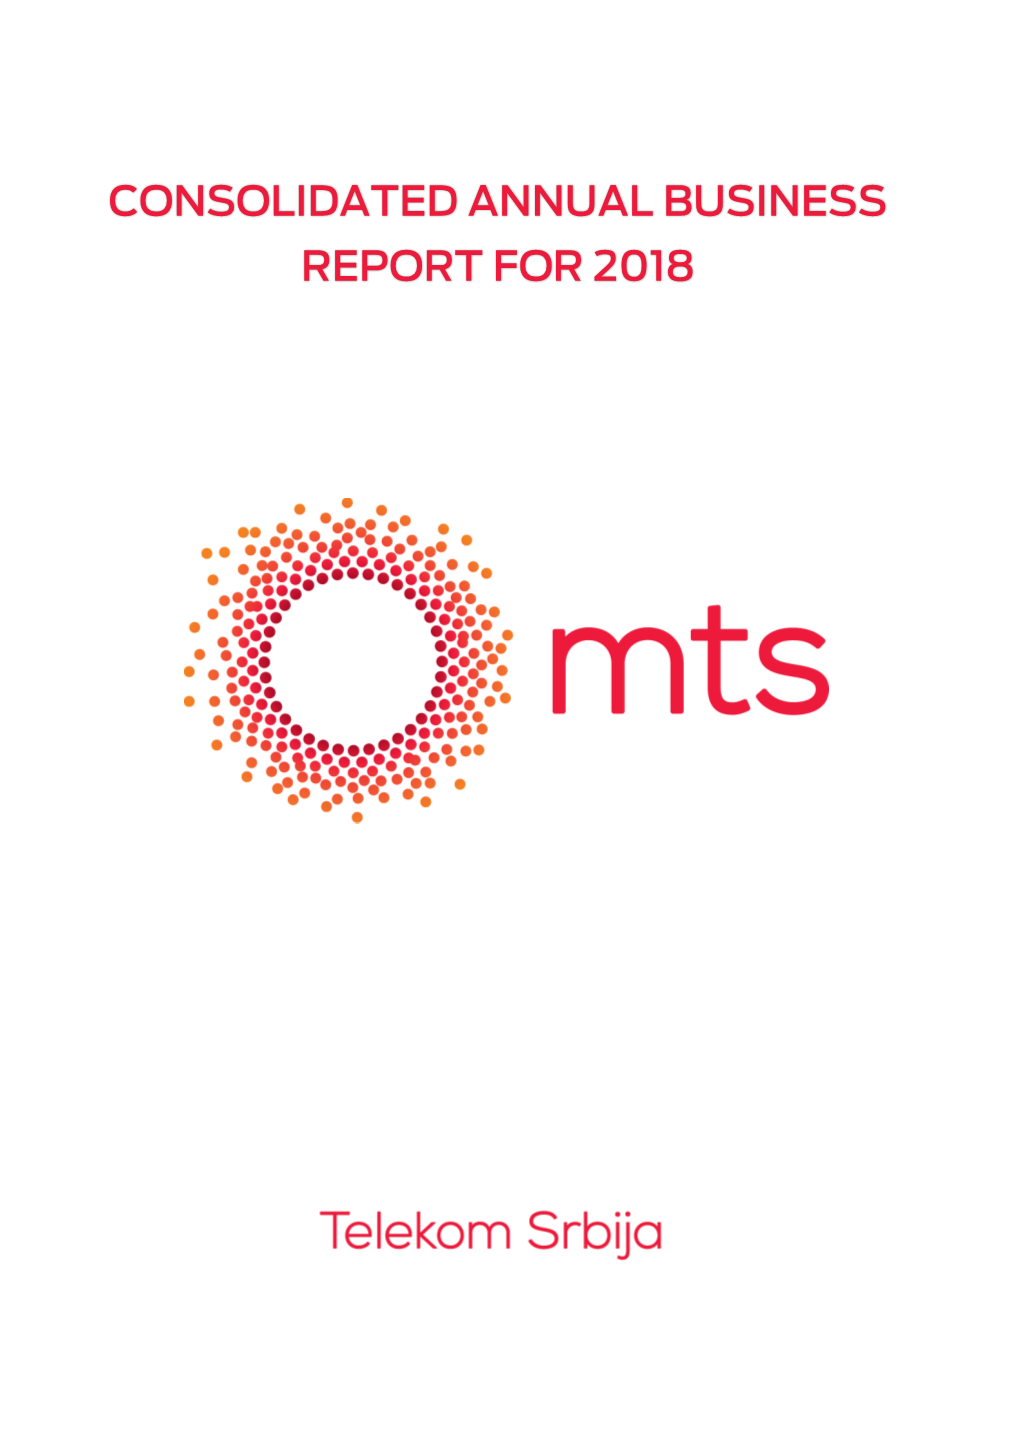 Consolidated Annual Business Report for 2018